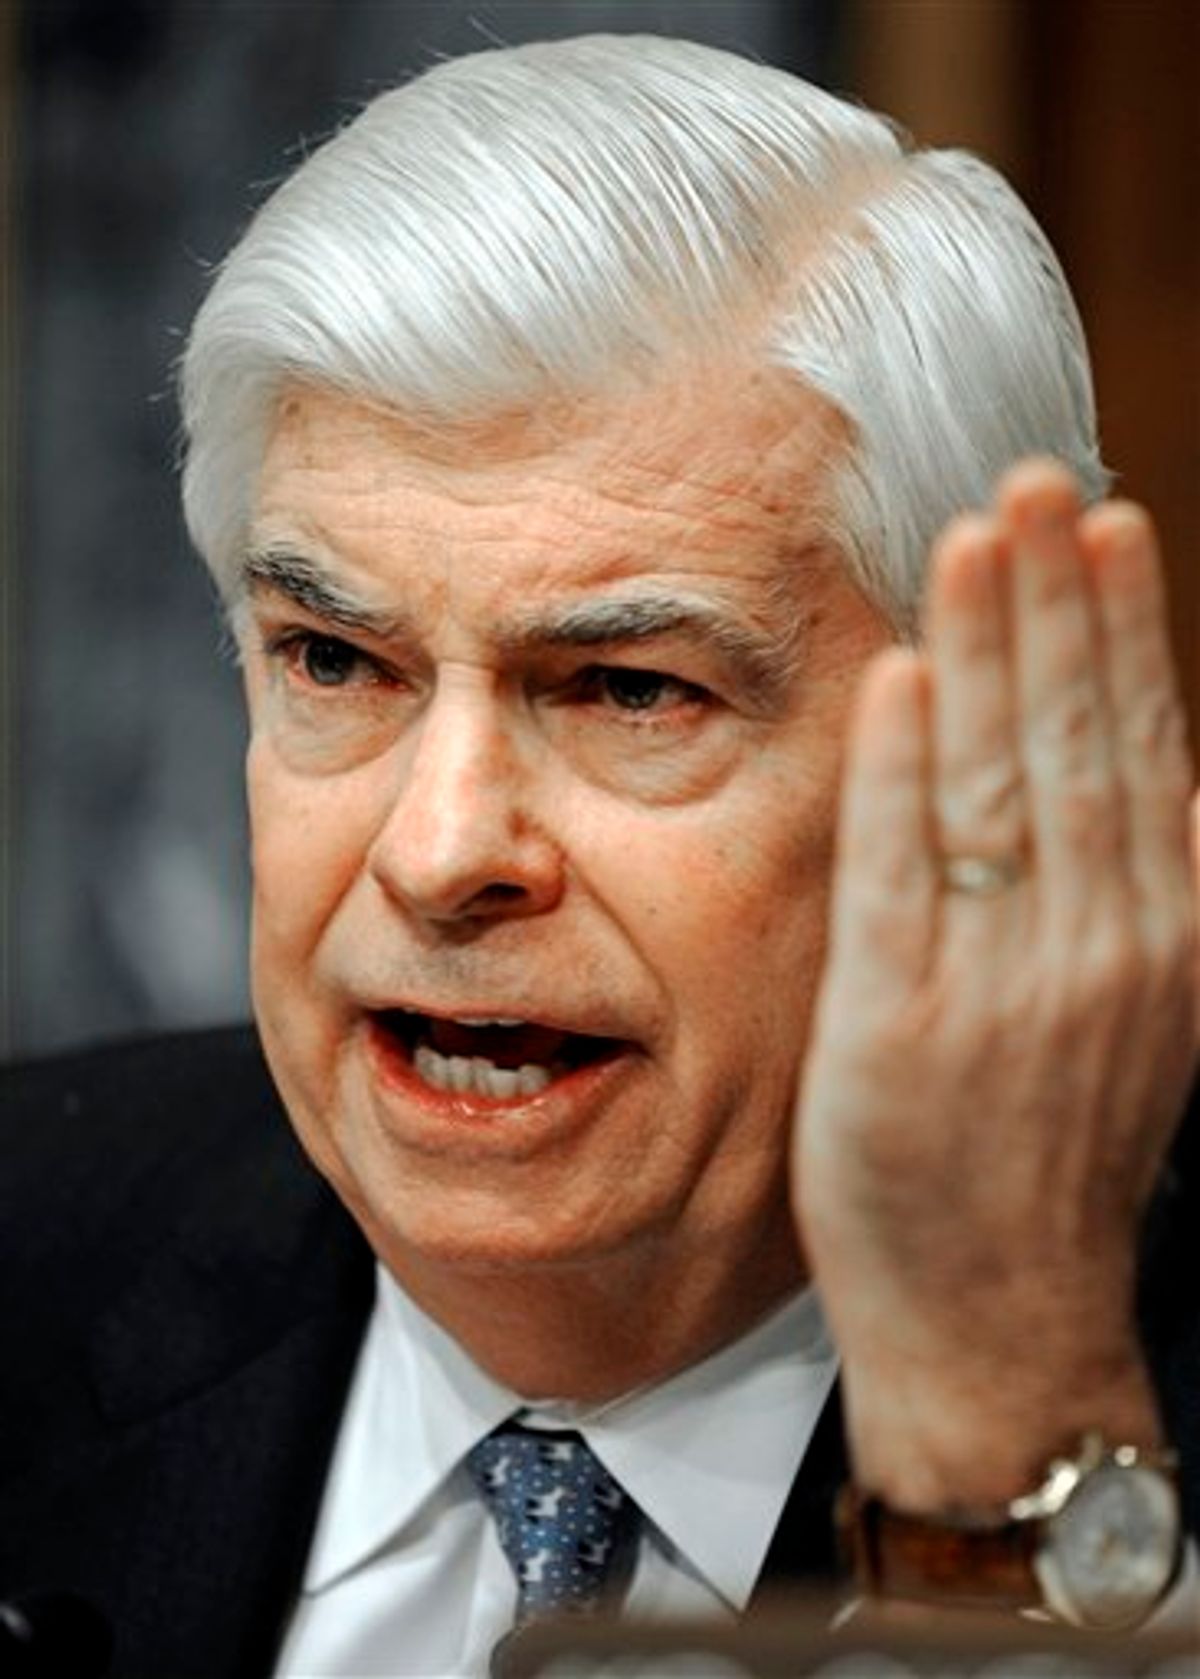 Senate Banking Committee Chairman Christopher Dodd, D-Conn. presides over the committee's hearing to examine implications of President Obama's proposal to rein in big Wall Street banks, Thursday, Feb. 4, 2010, on Capitol Hill in Washington.  (AP Photo/Cliff Owen) (AP)